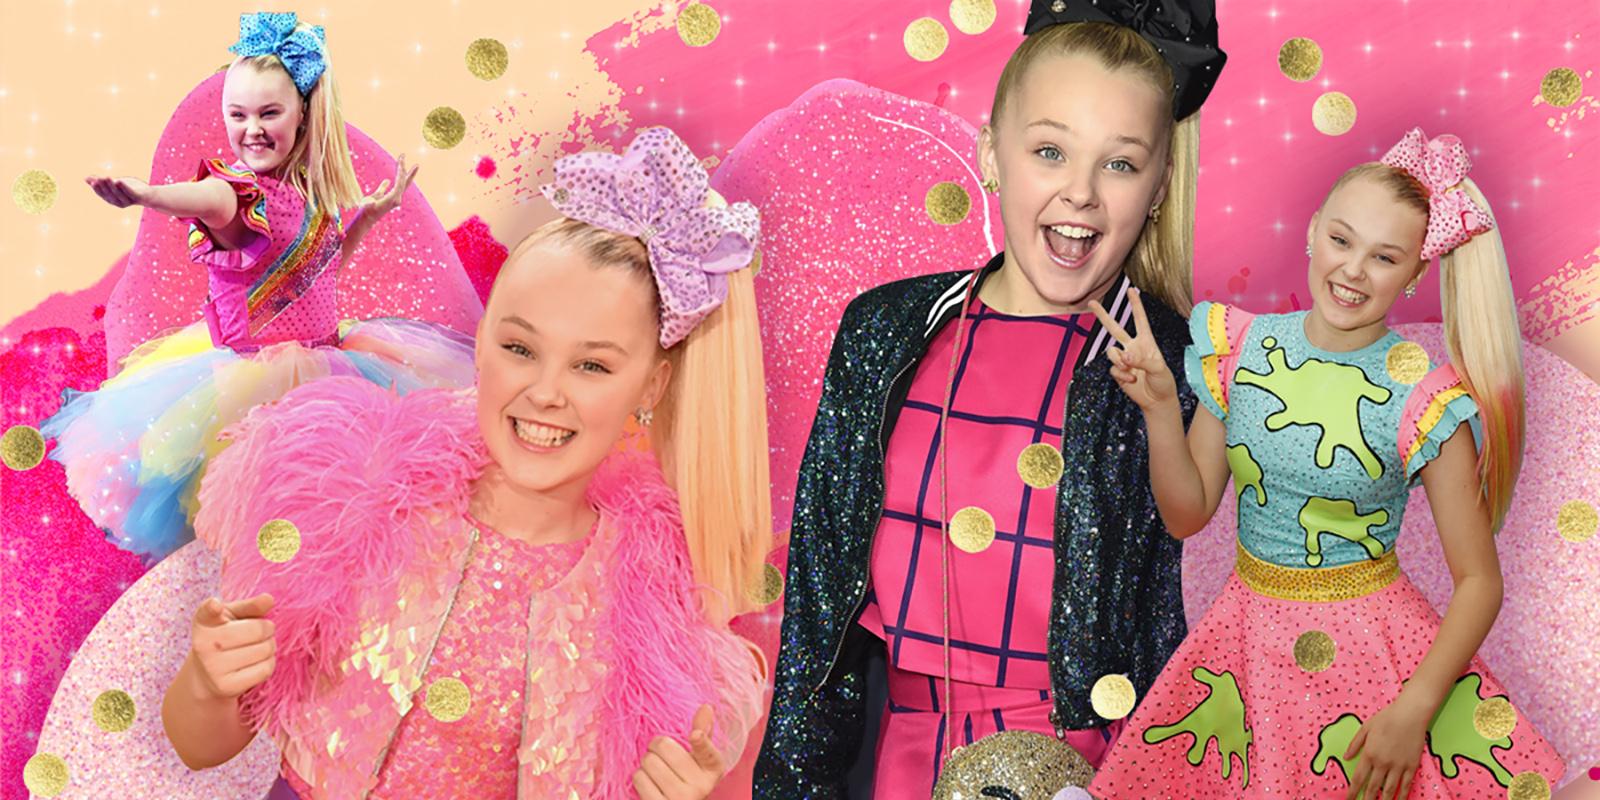 An Inside Look at the Making of a JoJo Siwa Costume